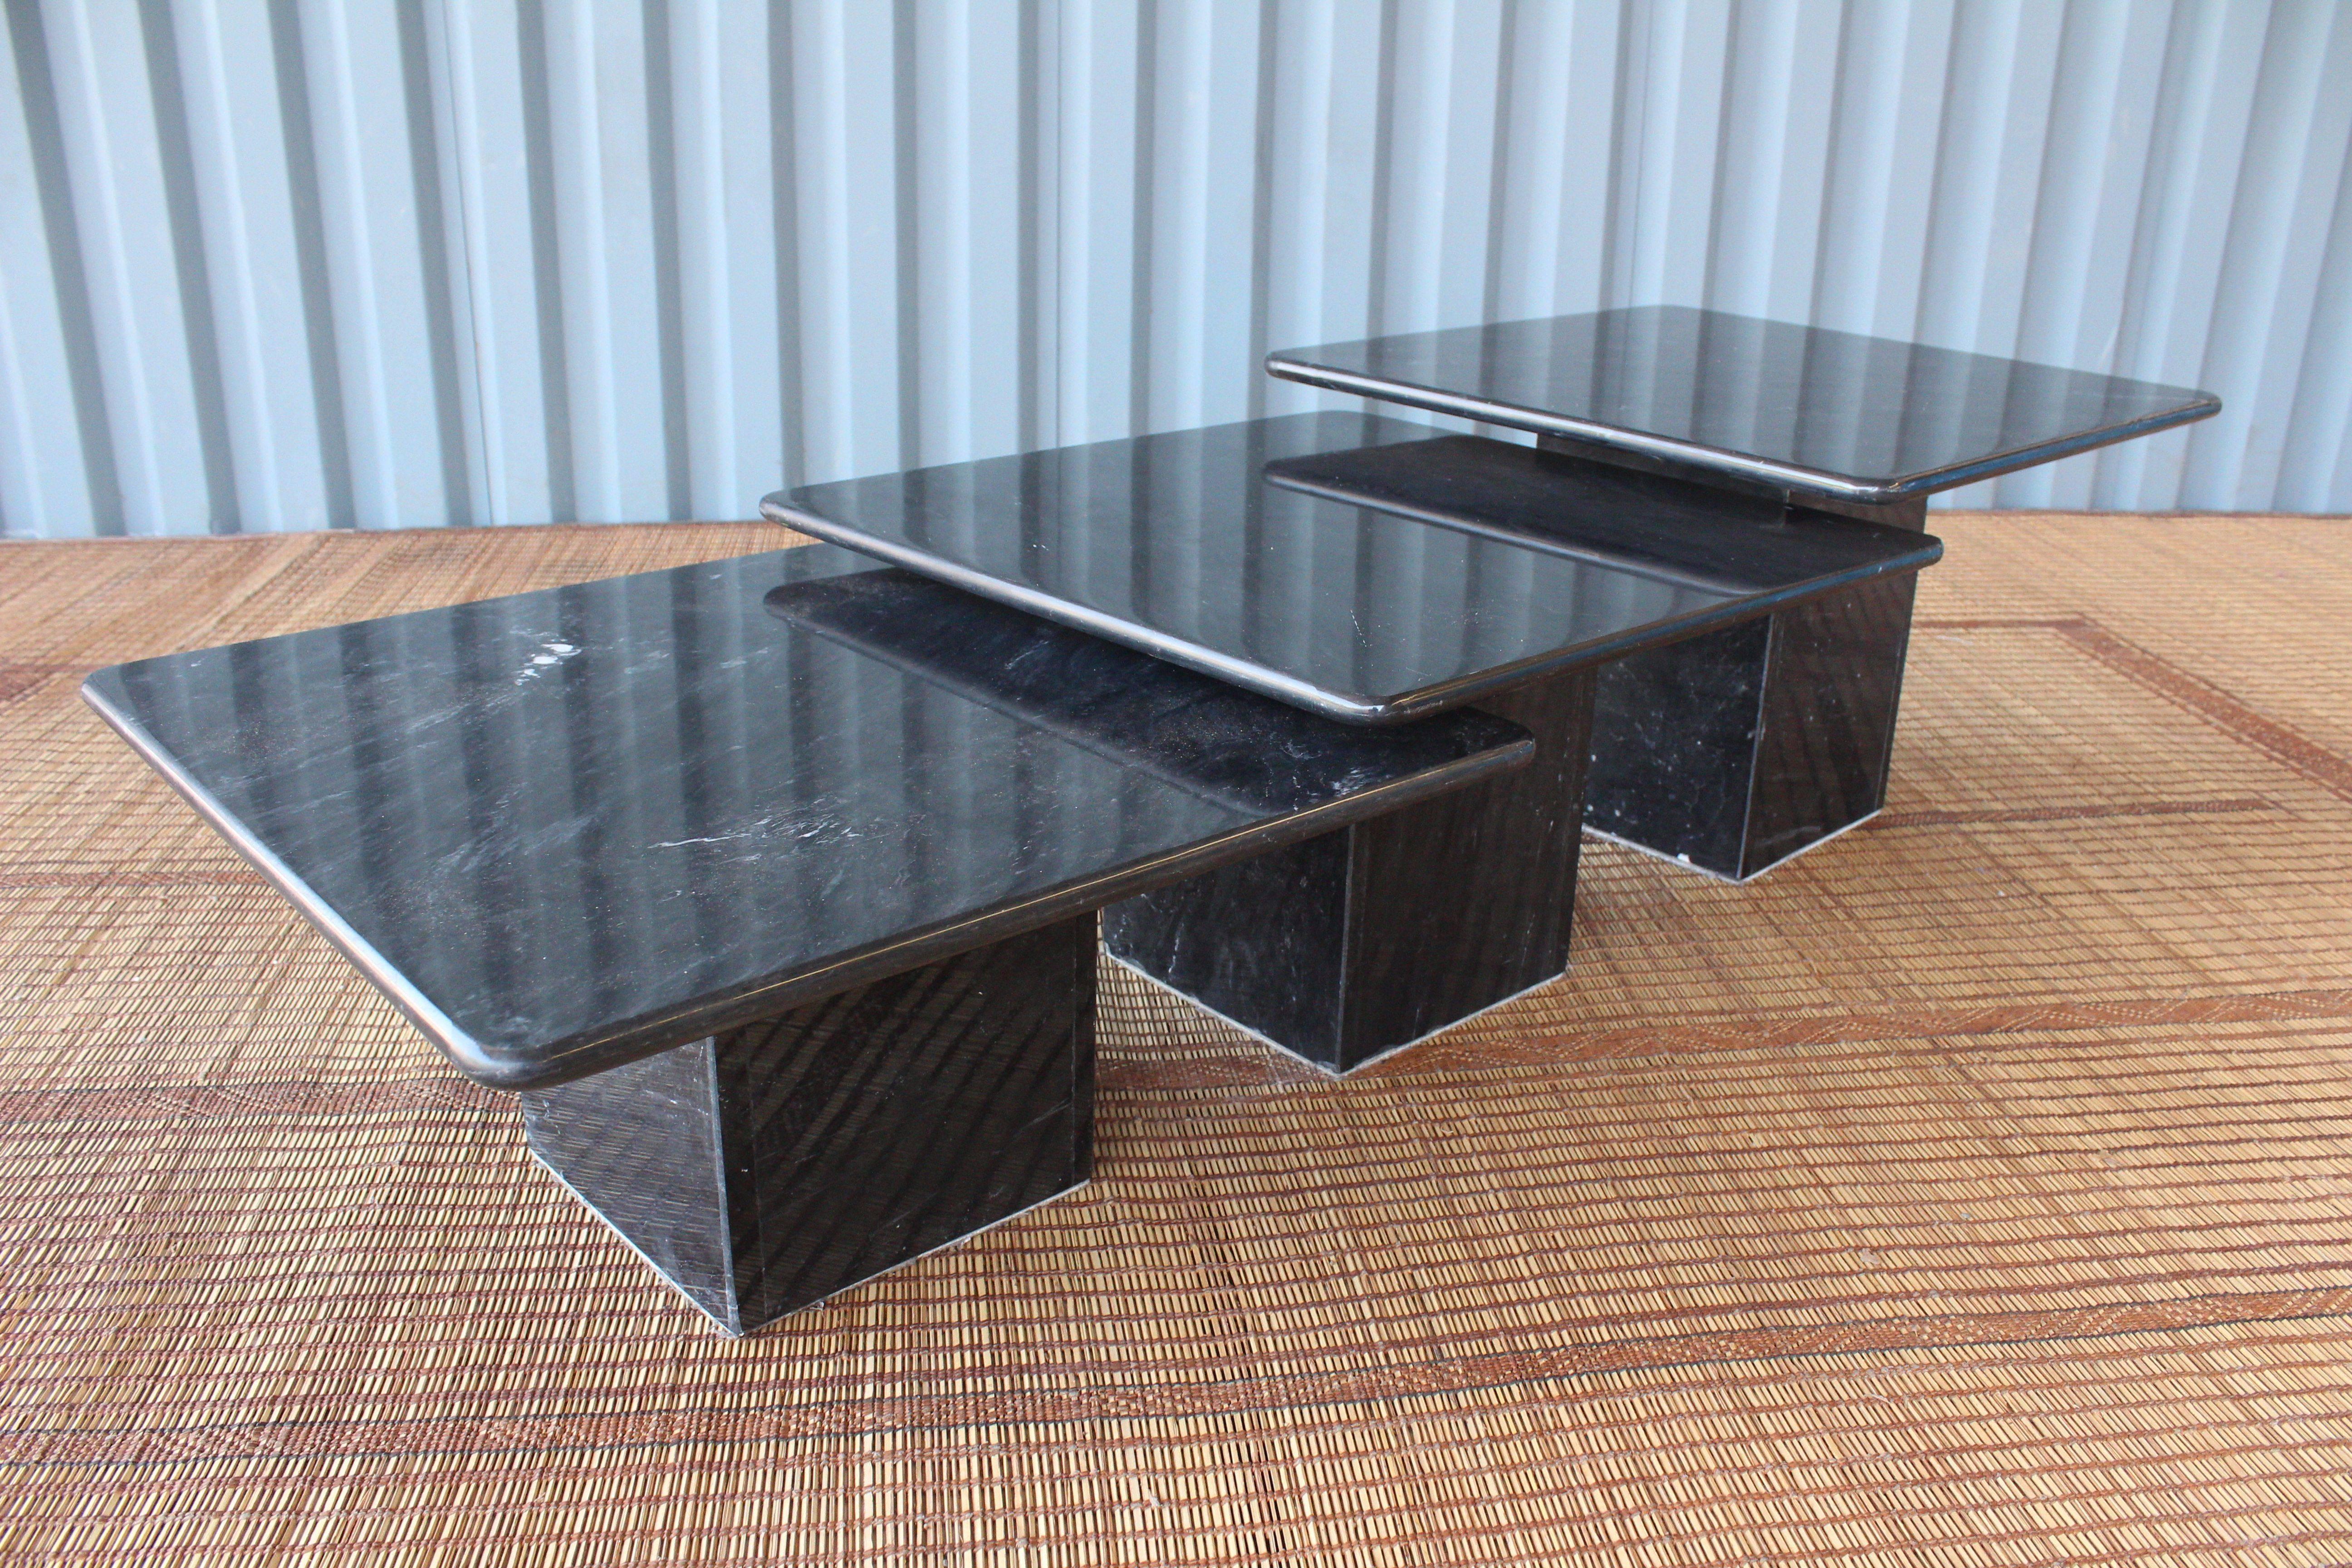 Set of three black marble nesting tables from France, circa 1970s. All three tables are in excellent vintage condition.
Measure: Large table: H 16 in x W 23.5 in x D 23.5 in
Medium table H 14 in x W 23.5 in x D 23.5 in
Small table H 12 in W x W